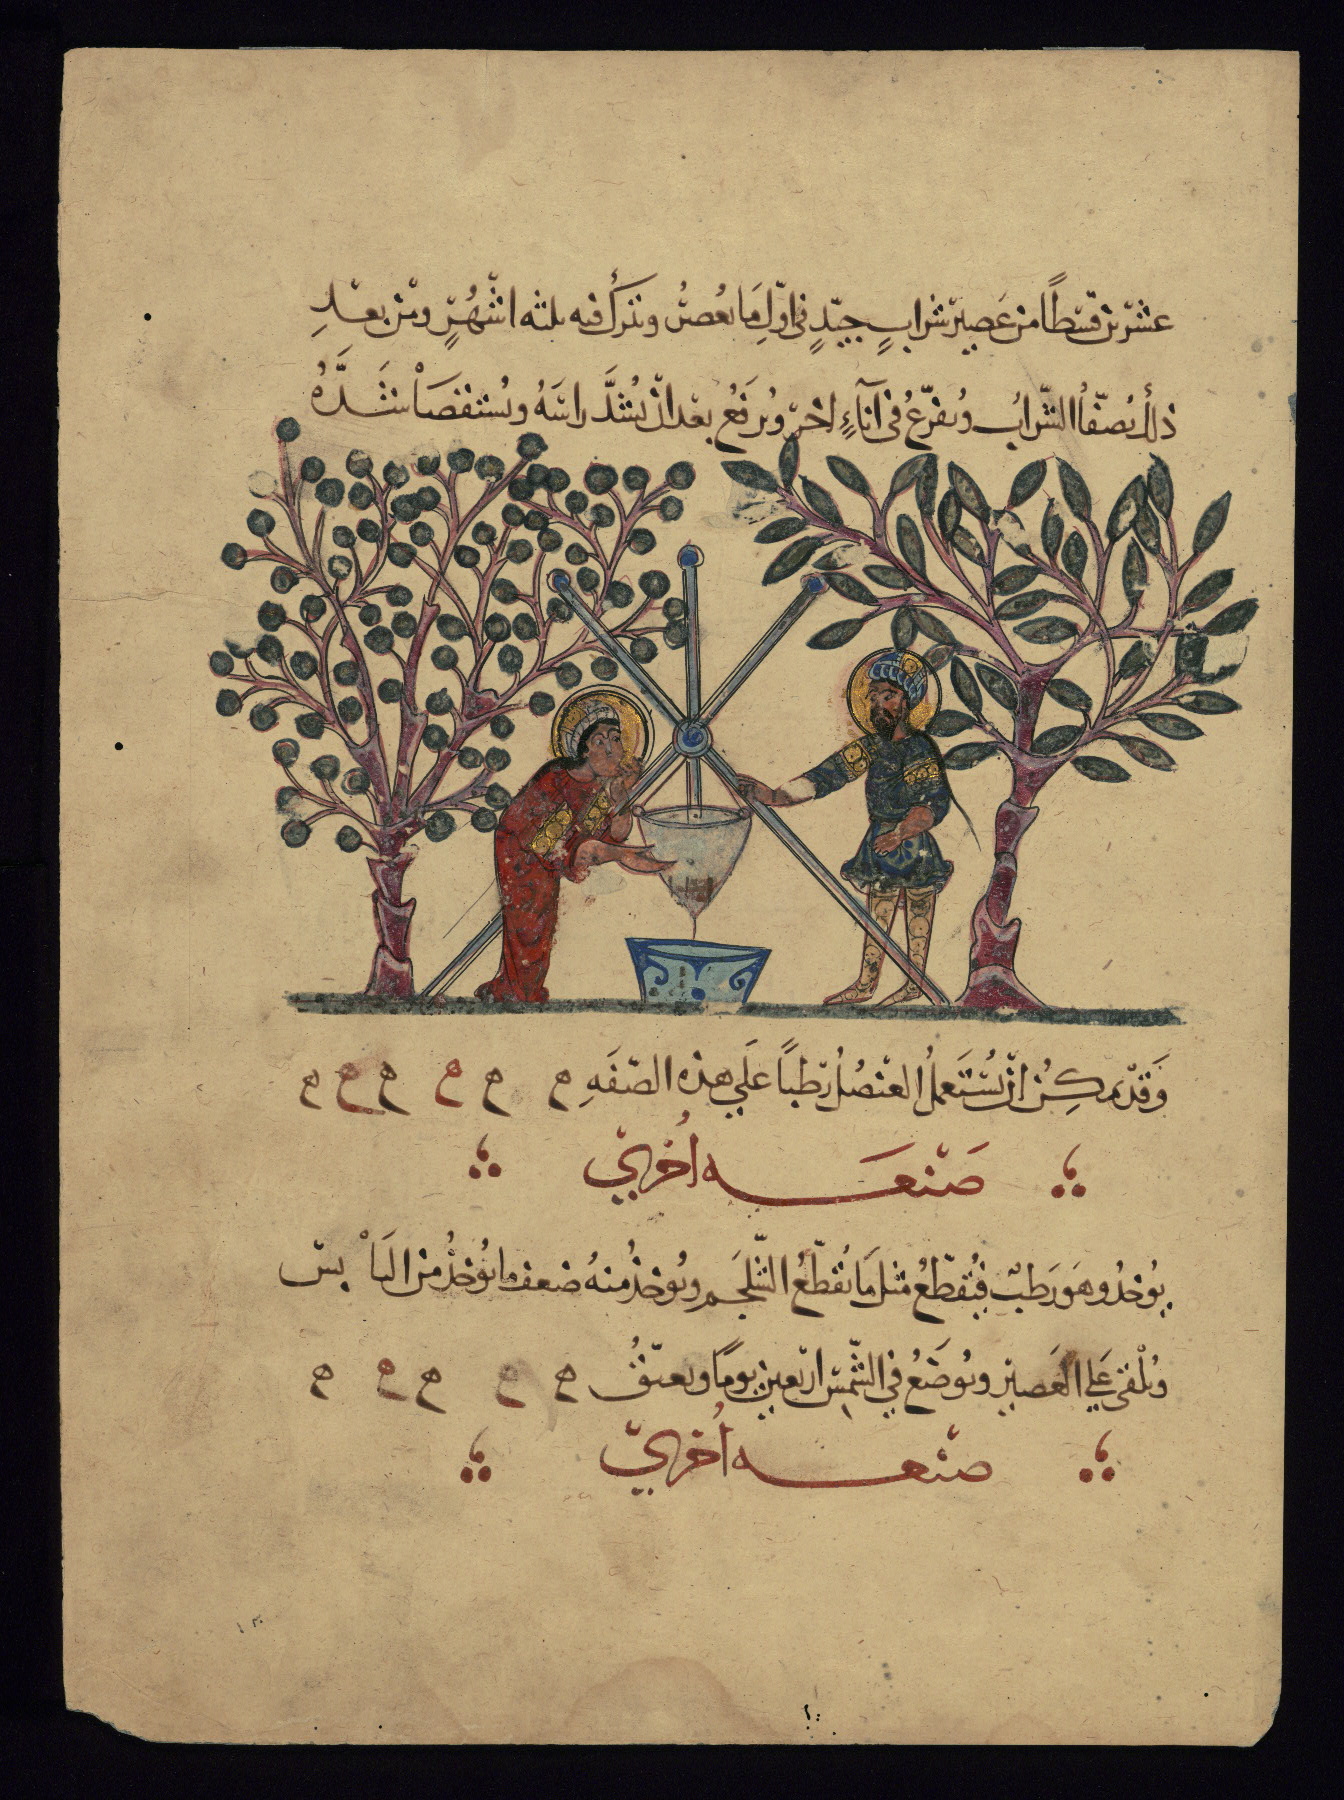 Walters Ms. W.675, Single leaf from the Arabic version of